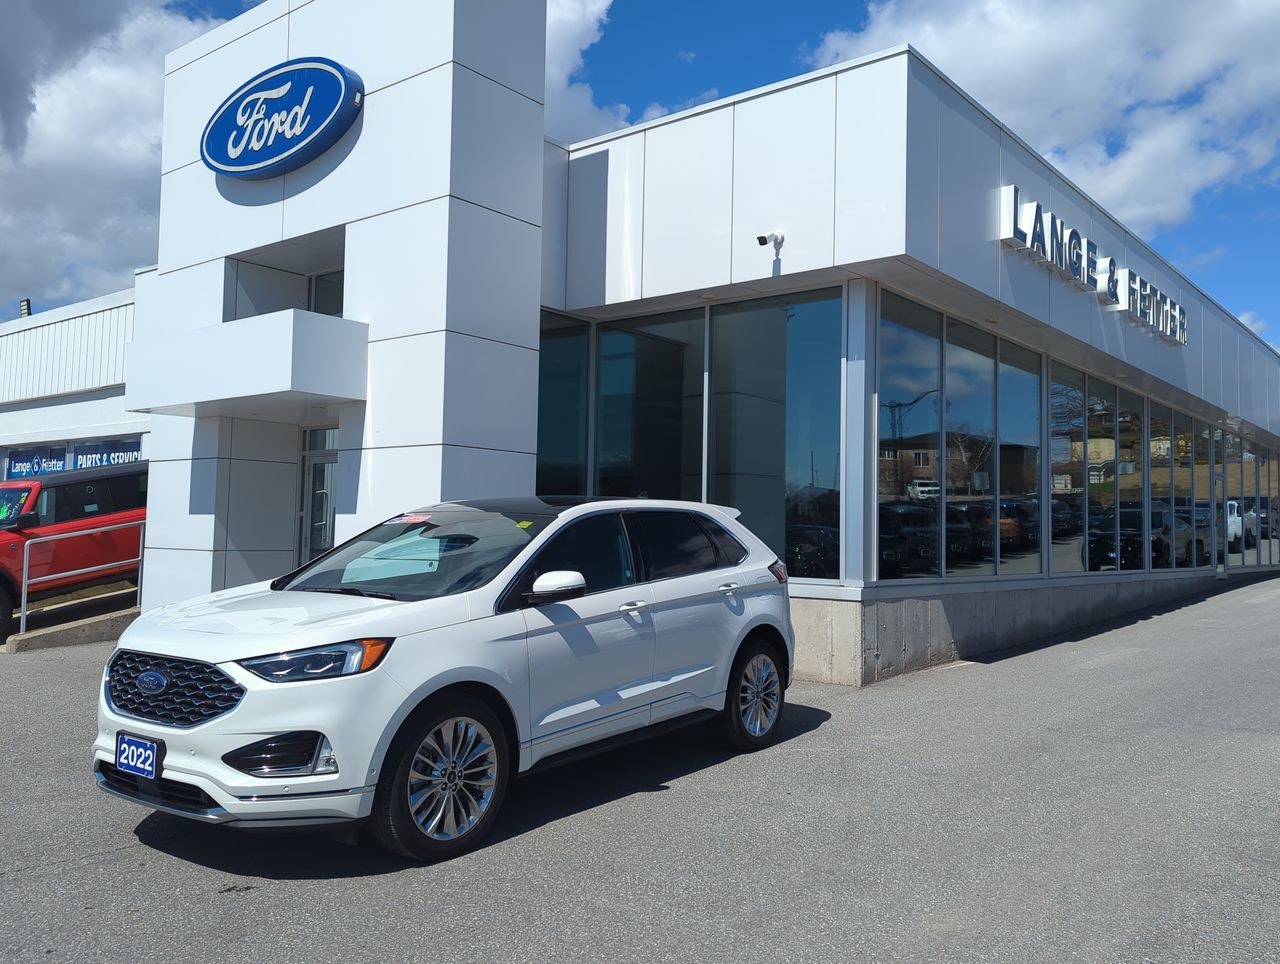 2022 Ford Edge - 21598A Full Image 1